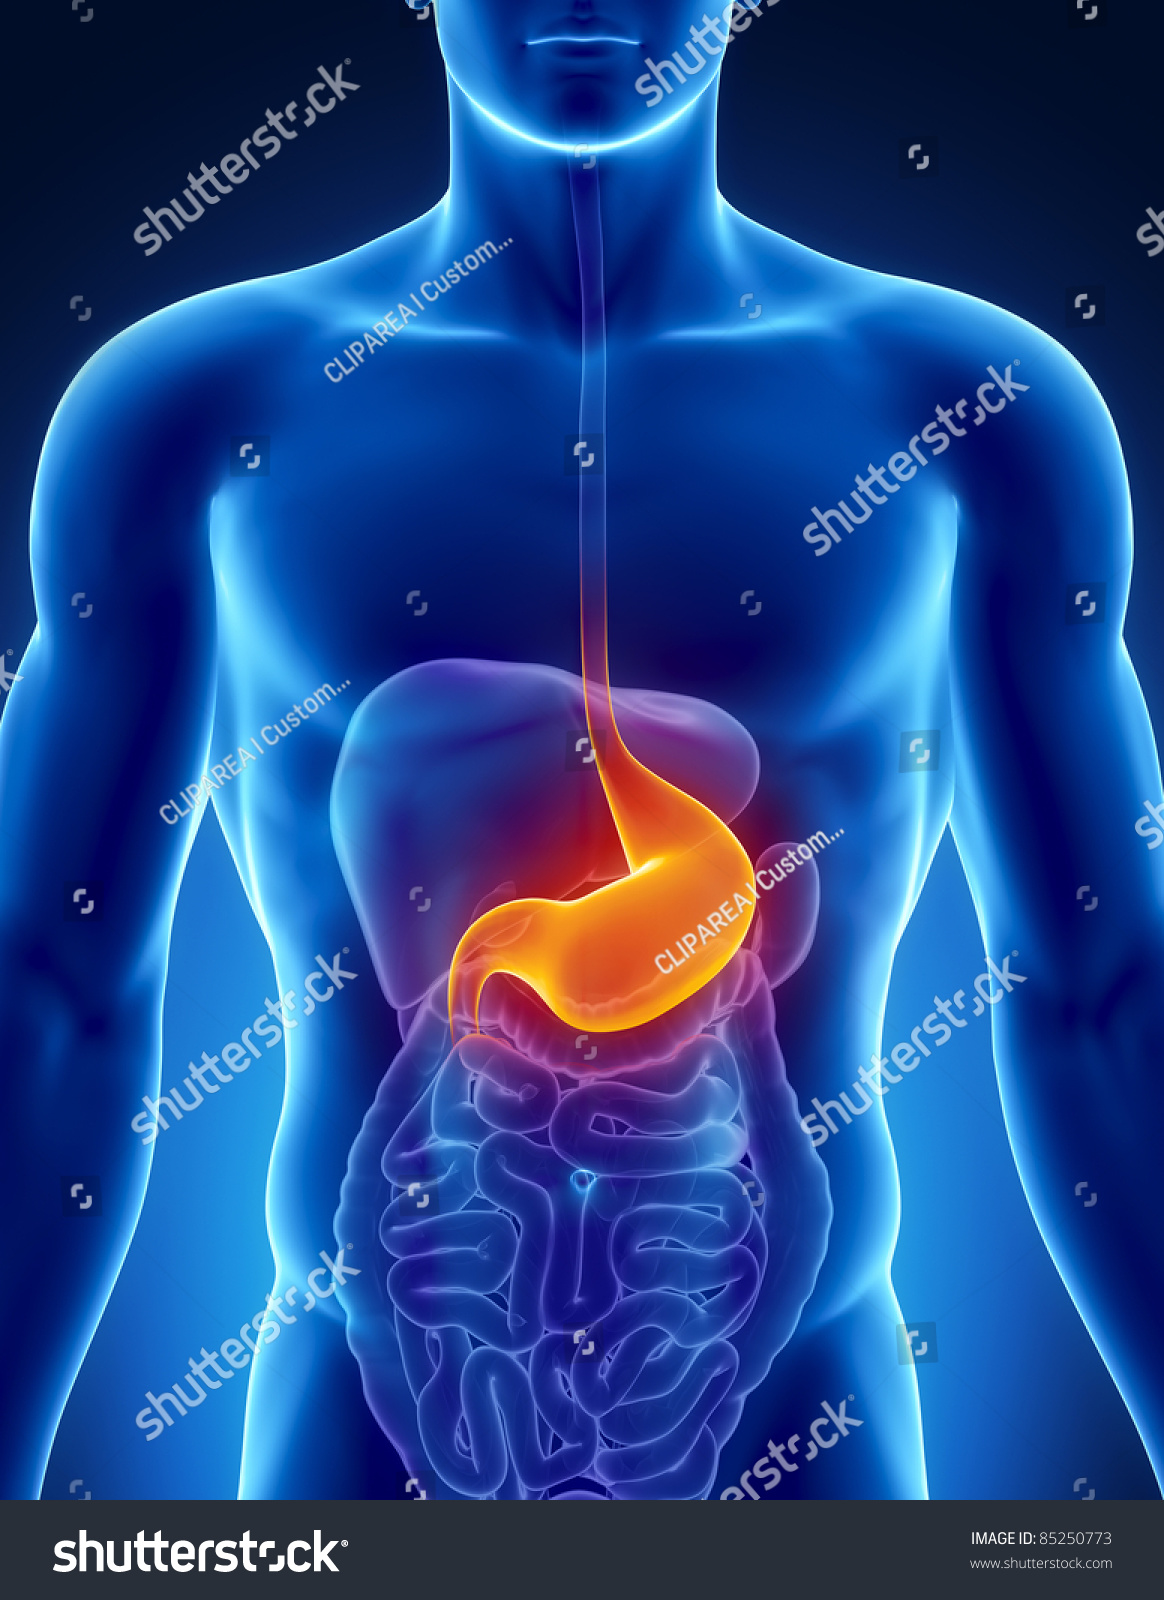 Male Stomach Anatomy Of Human Organs In X-Ray View Stock Photo 85250773